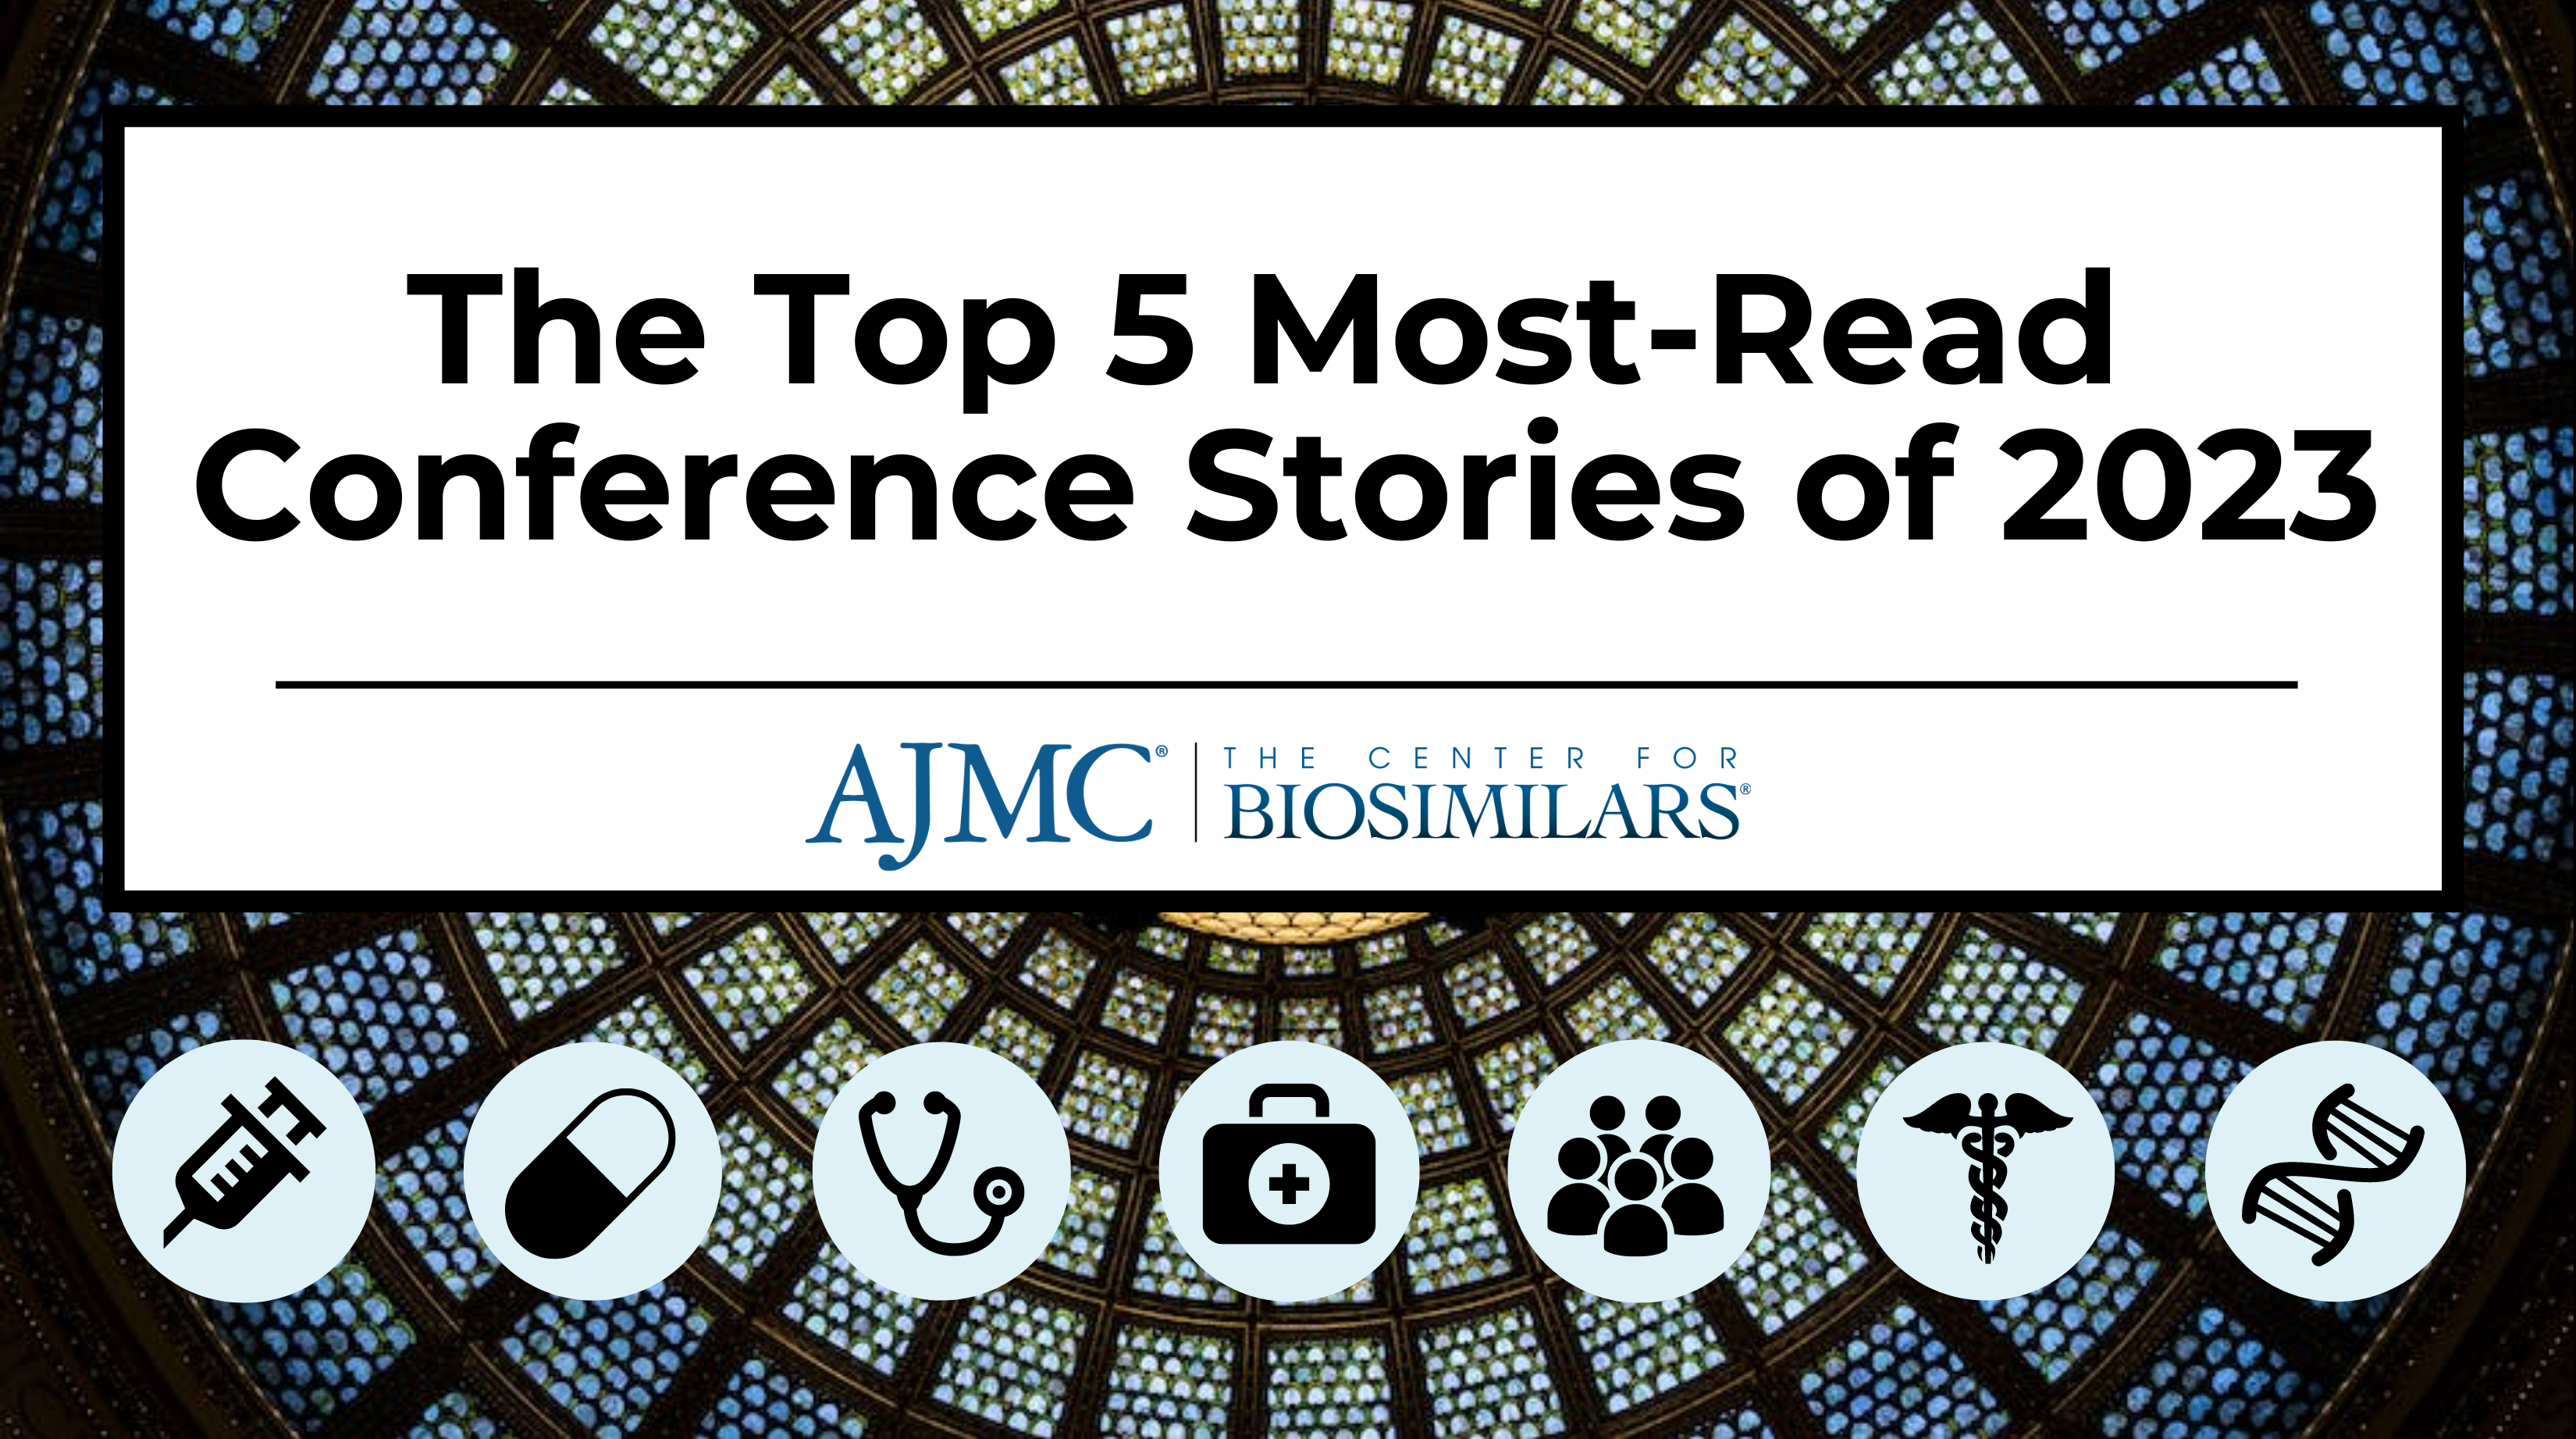 The Top 5 Most-Read Conference Stories of 2023